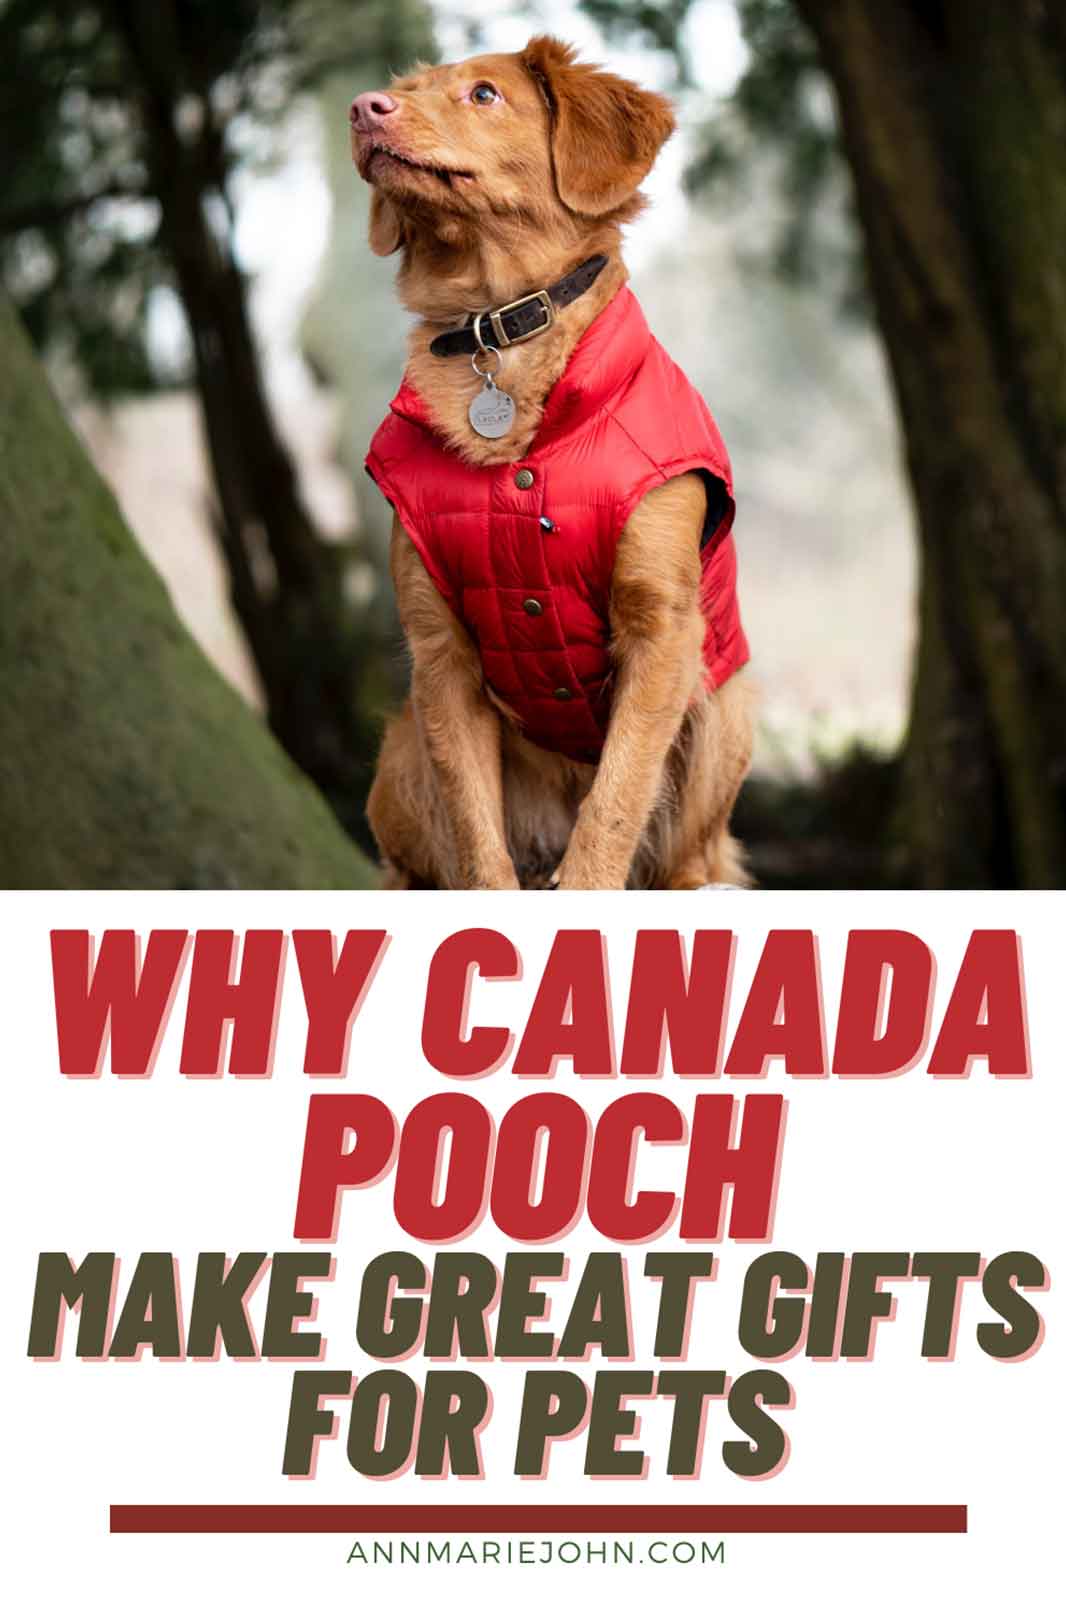 Why Canada Pooch Make Great Gifts For Pets